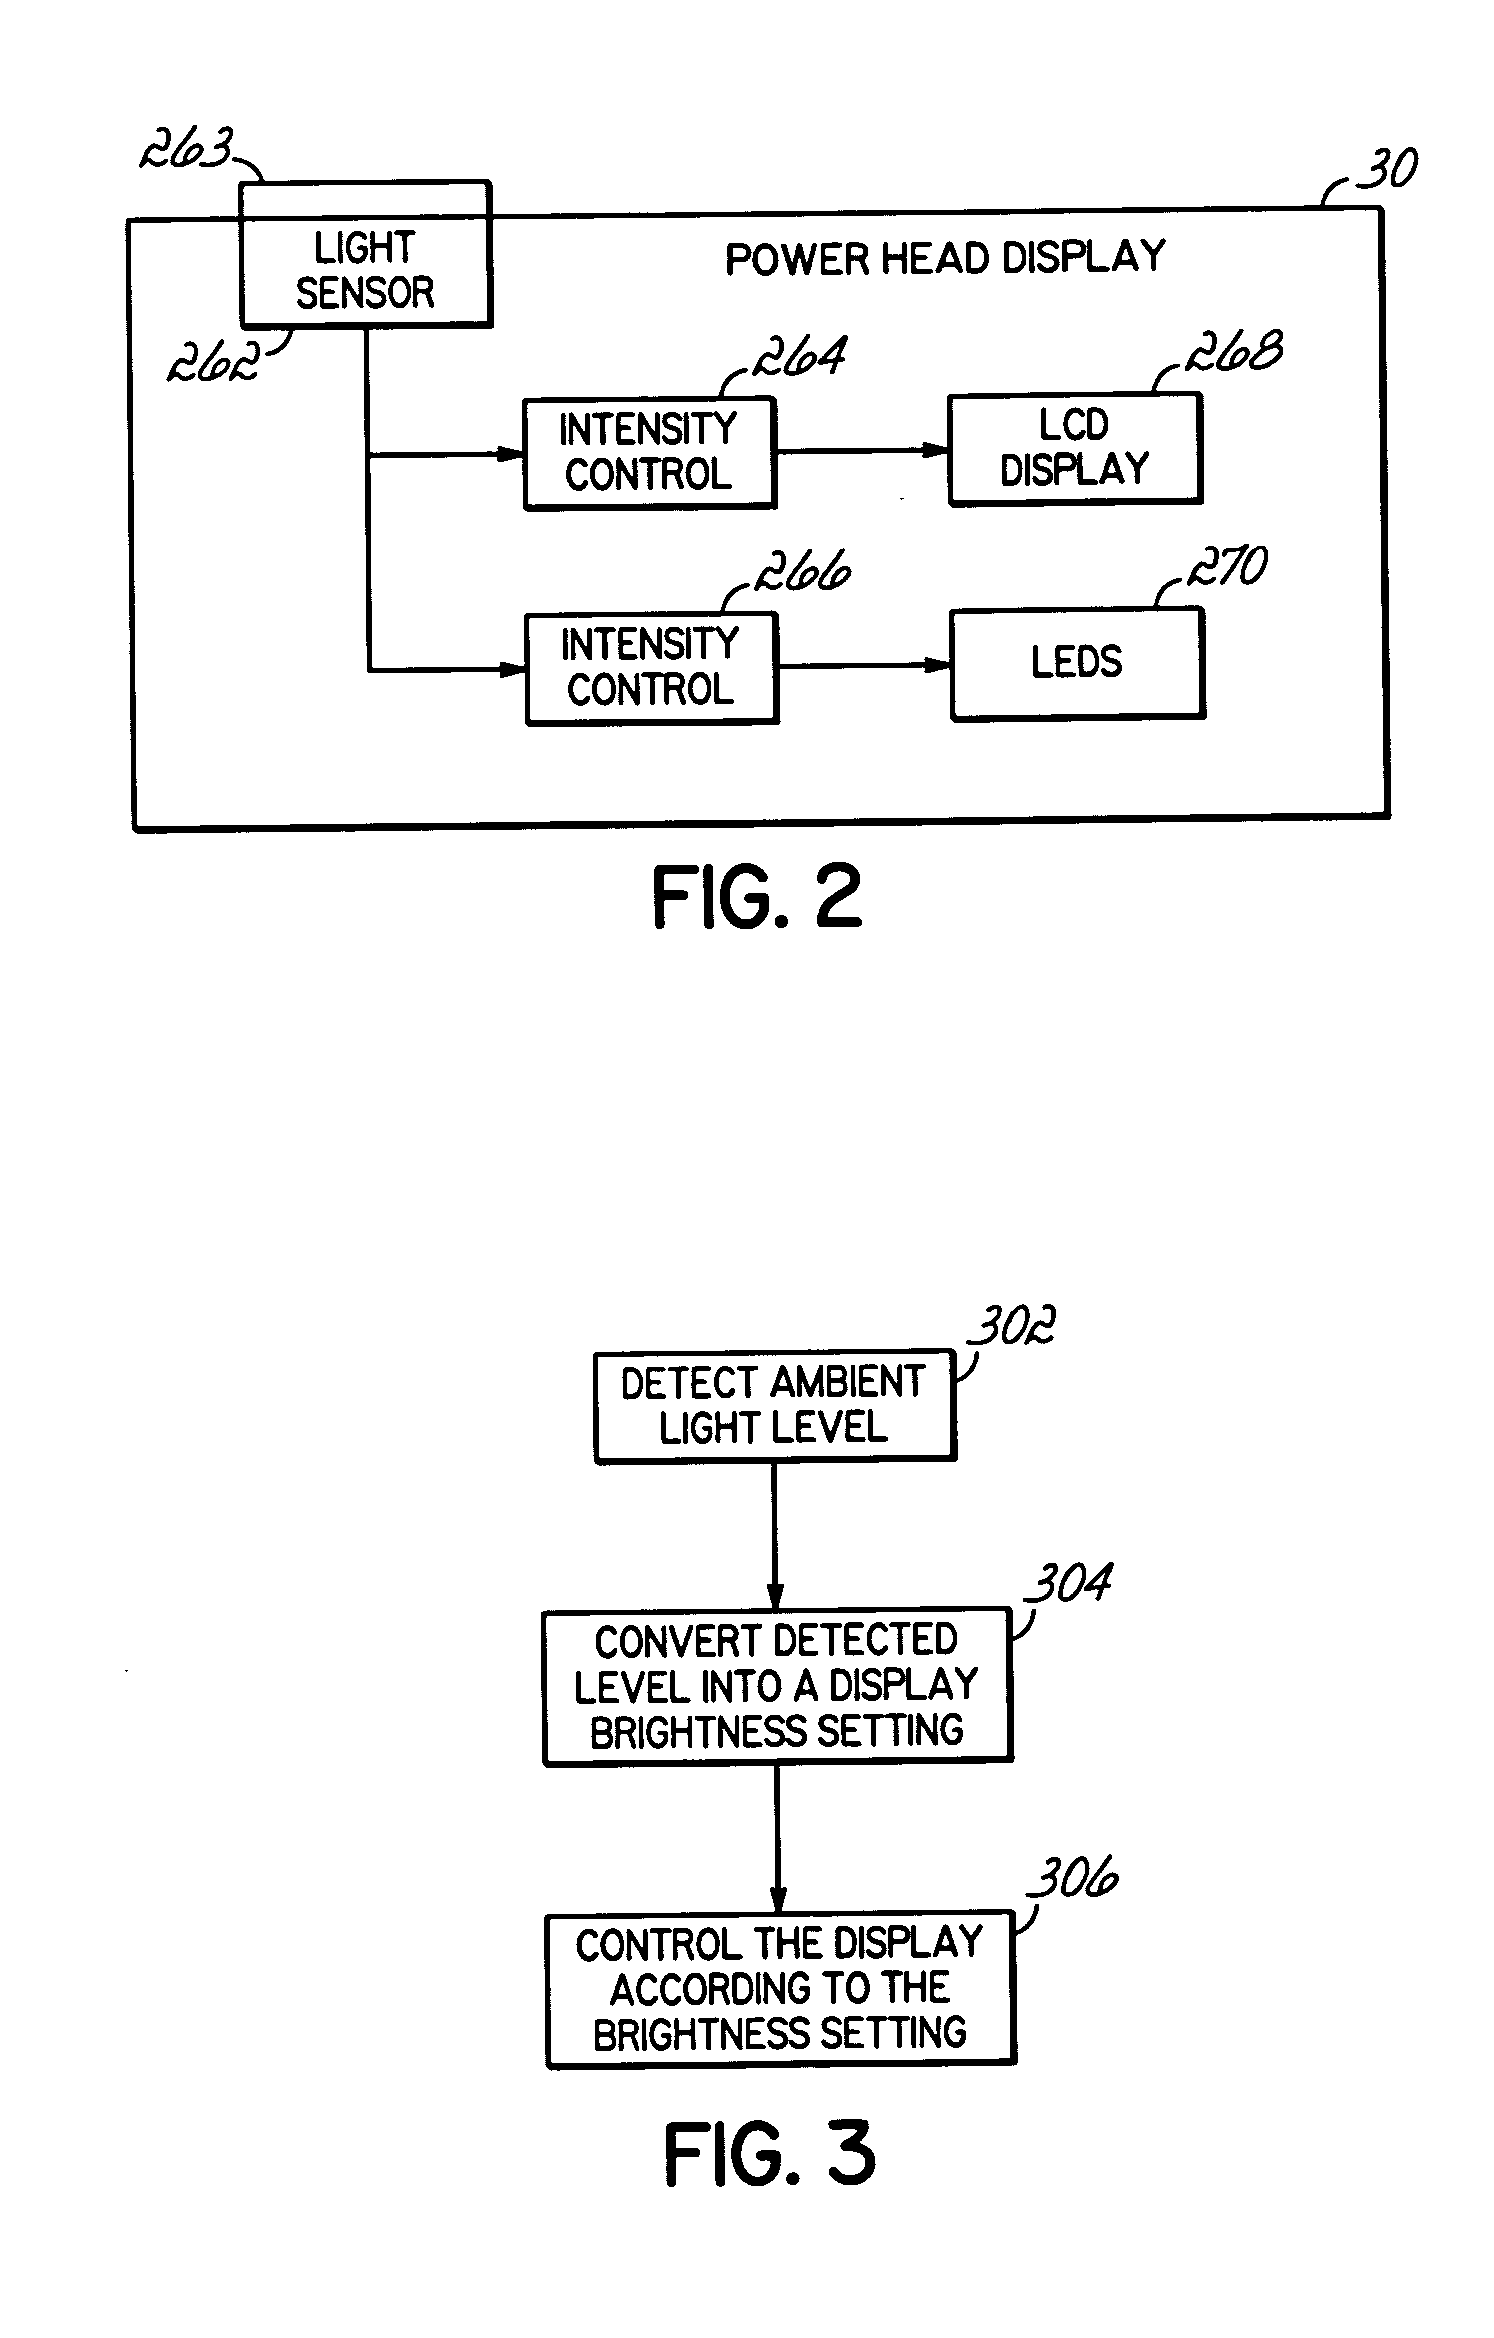 Powerhead control in a power injection system